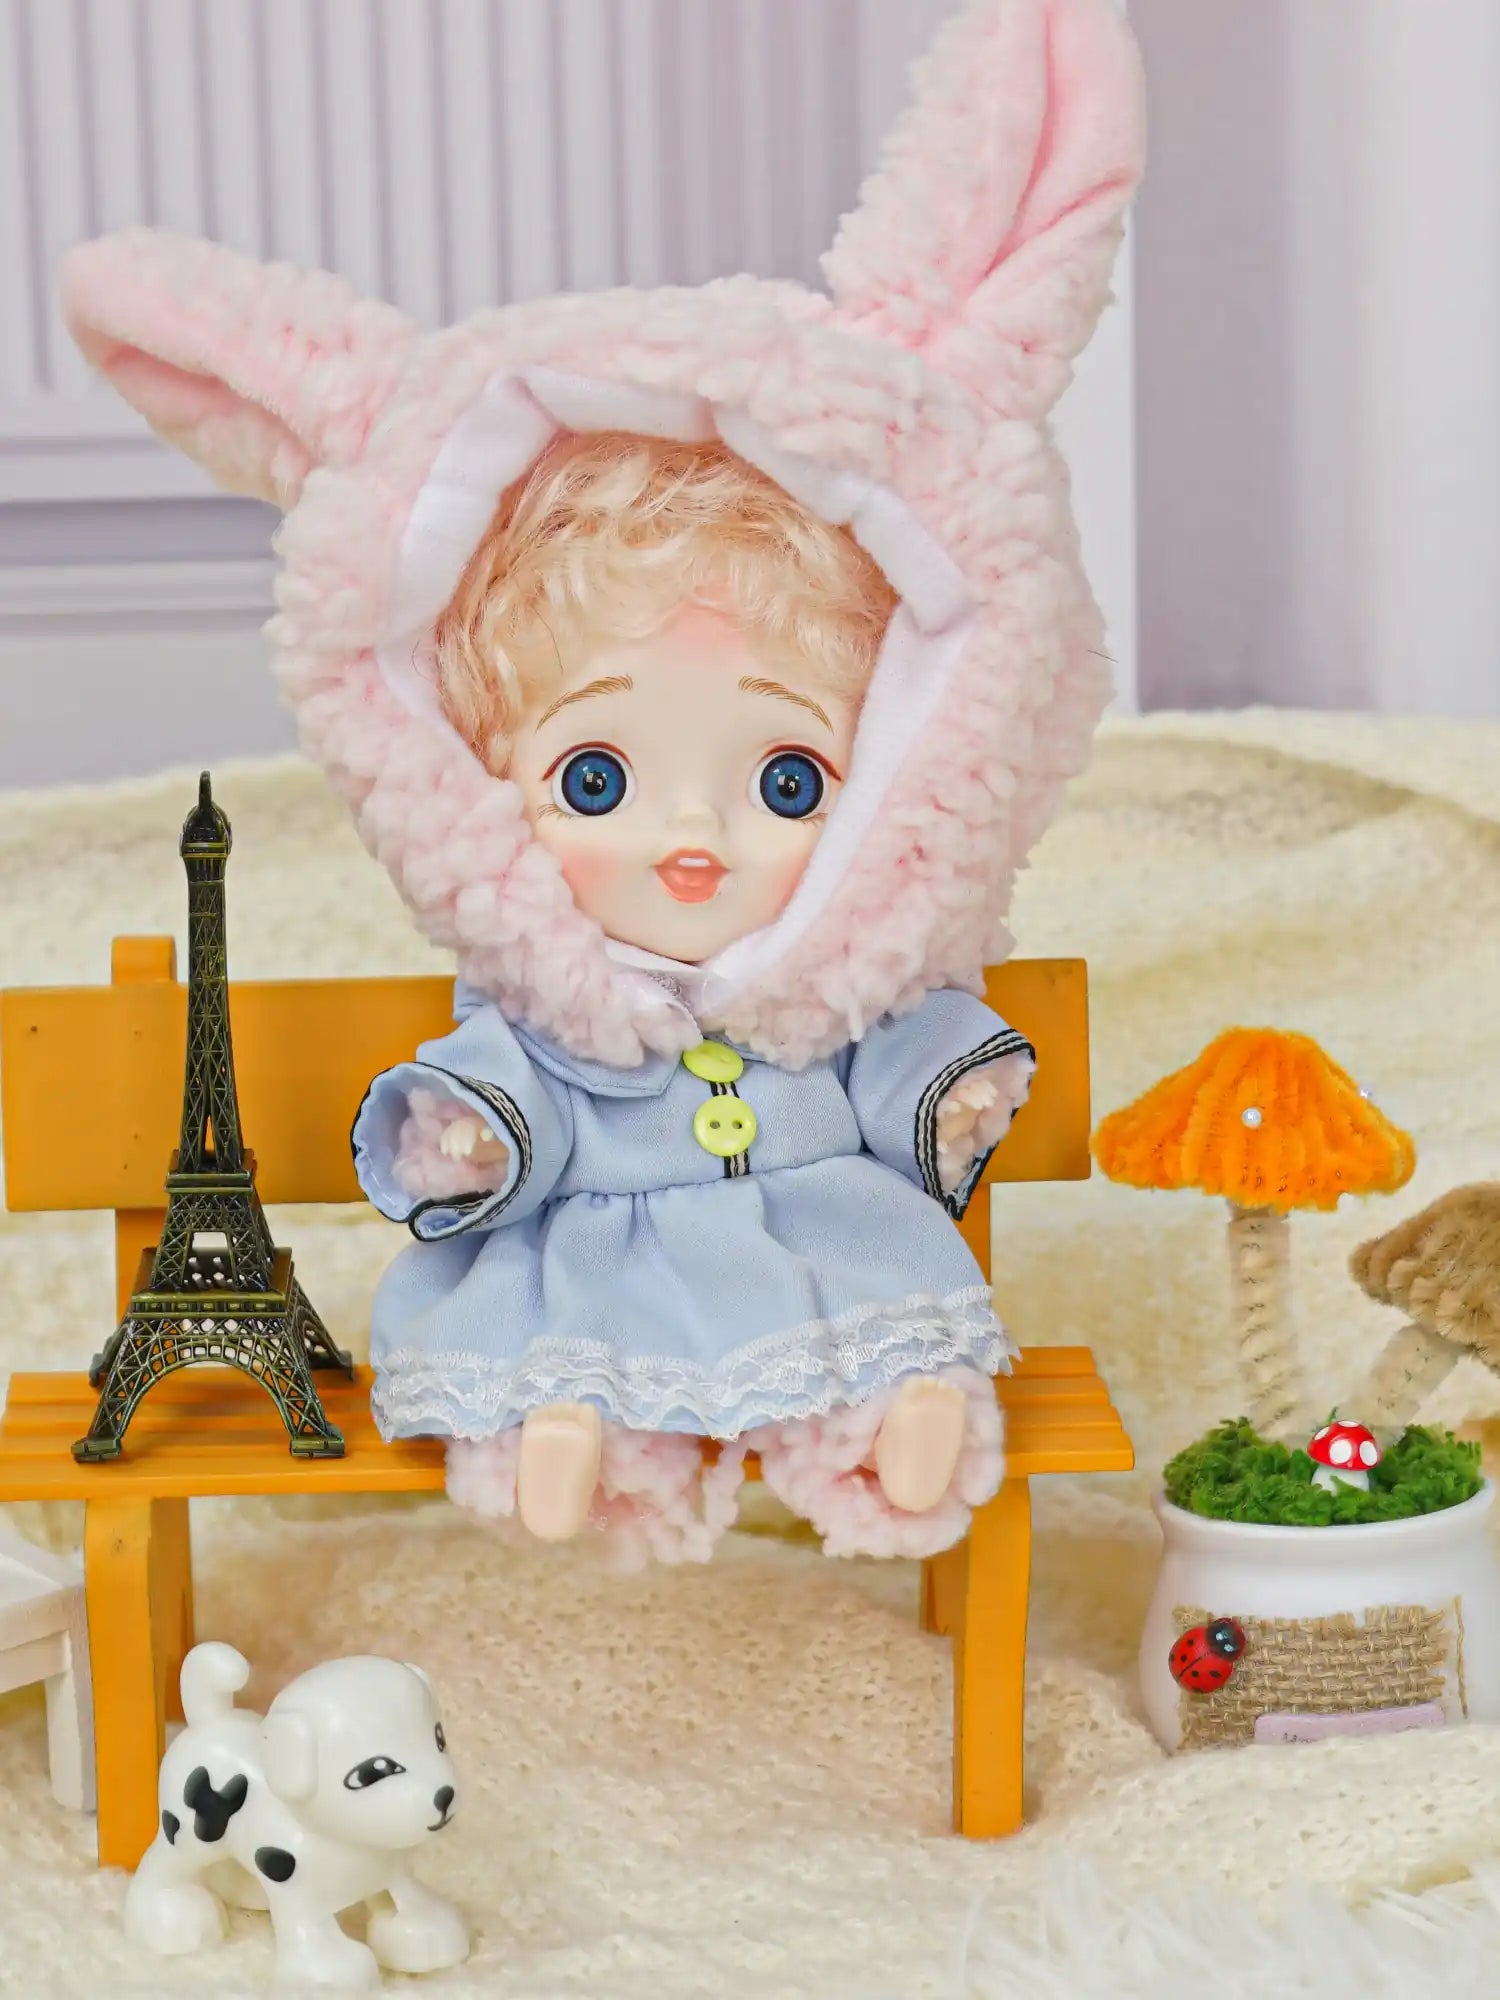 BJD with curly blonde hair in rabbit attire with a toy pup and Eiffel Tower setting.